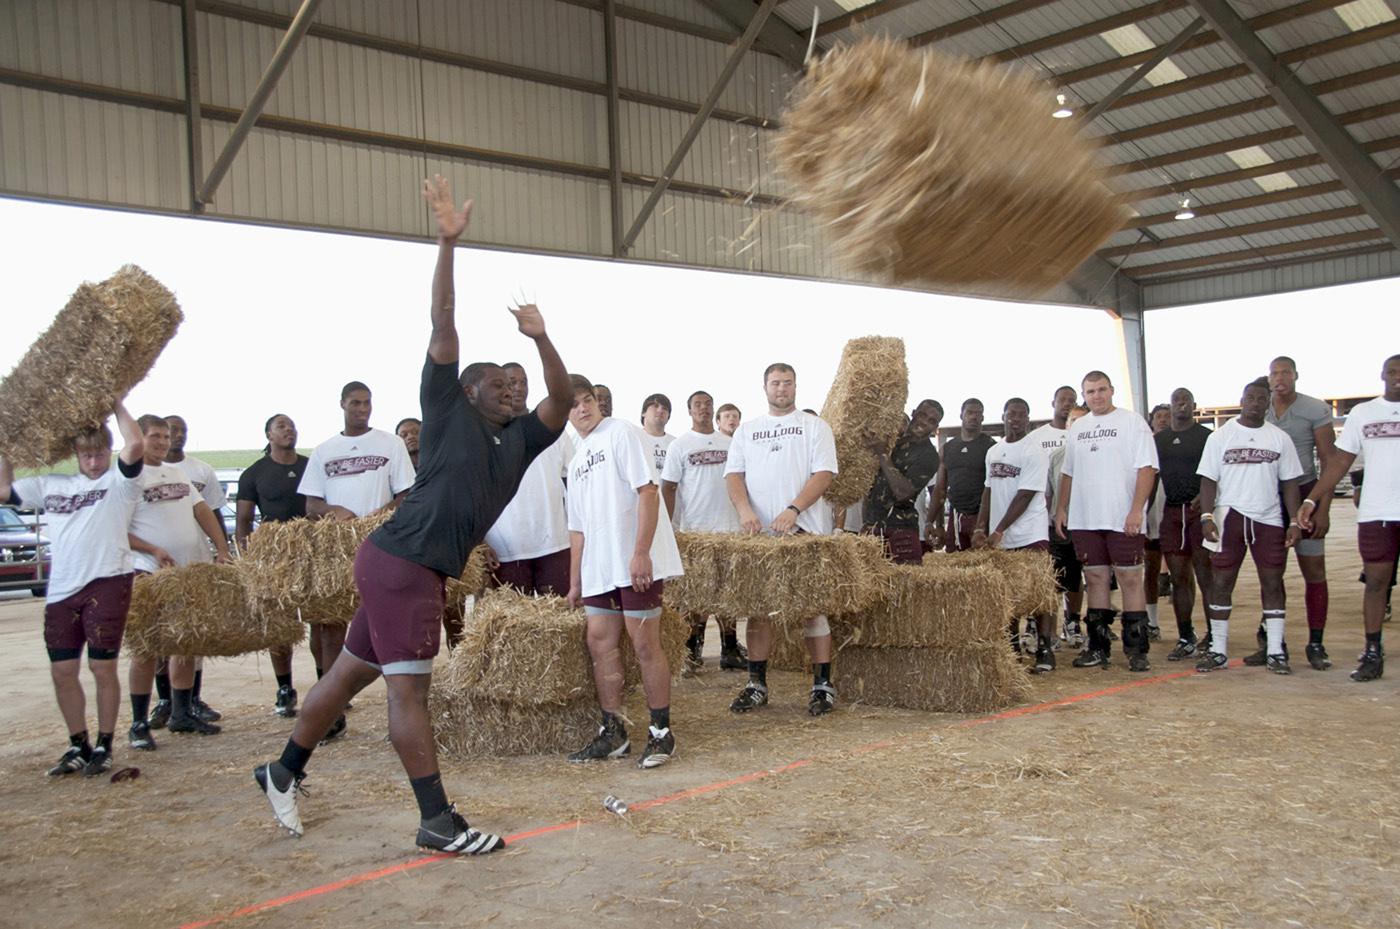 Mississippi State University defensive lineman Kaleb Eulls of Yazoo City takes part in a friendly hay toss competition with fellow football players at the Mississippi Horse Park after Monday's practice on "the farm." The first annual event, called "Beefin' up the Bulldogs," included a steak supper and activities promoting MSU's land-grant heritage. Sponsors included First South Farm Credit, Mississippi Cattlemen's Association, Mississippi Beef Council, MSU's Animal and Dairy Science Department and the Missi